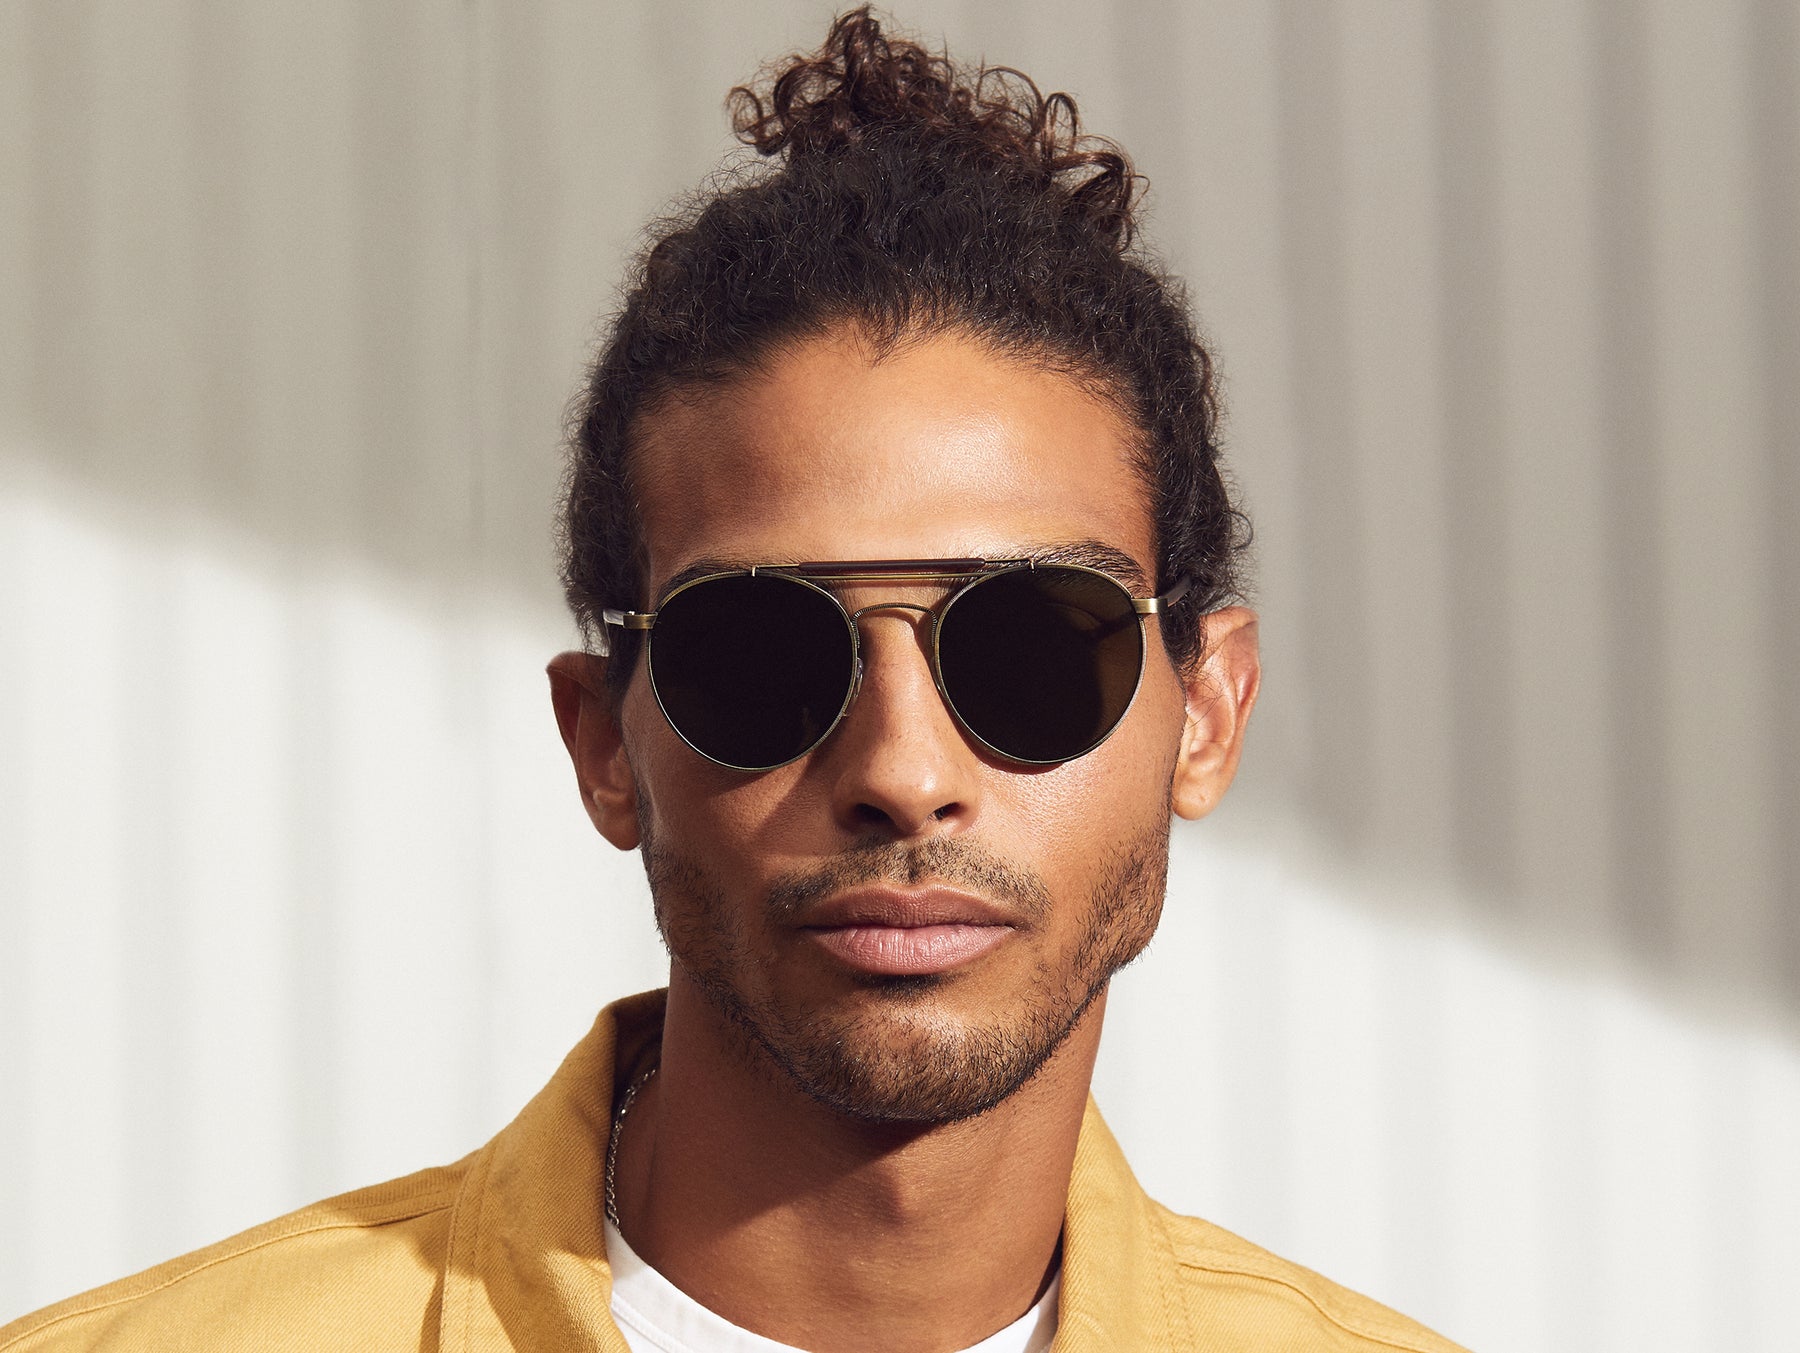 Model is wearing The LAZER SUN in Antique Gold/Matte Dark Brown in size 52 with G-15 Glass Lenses